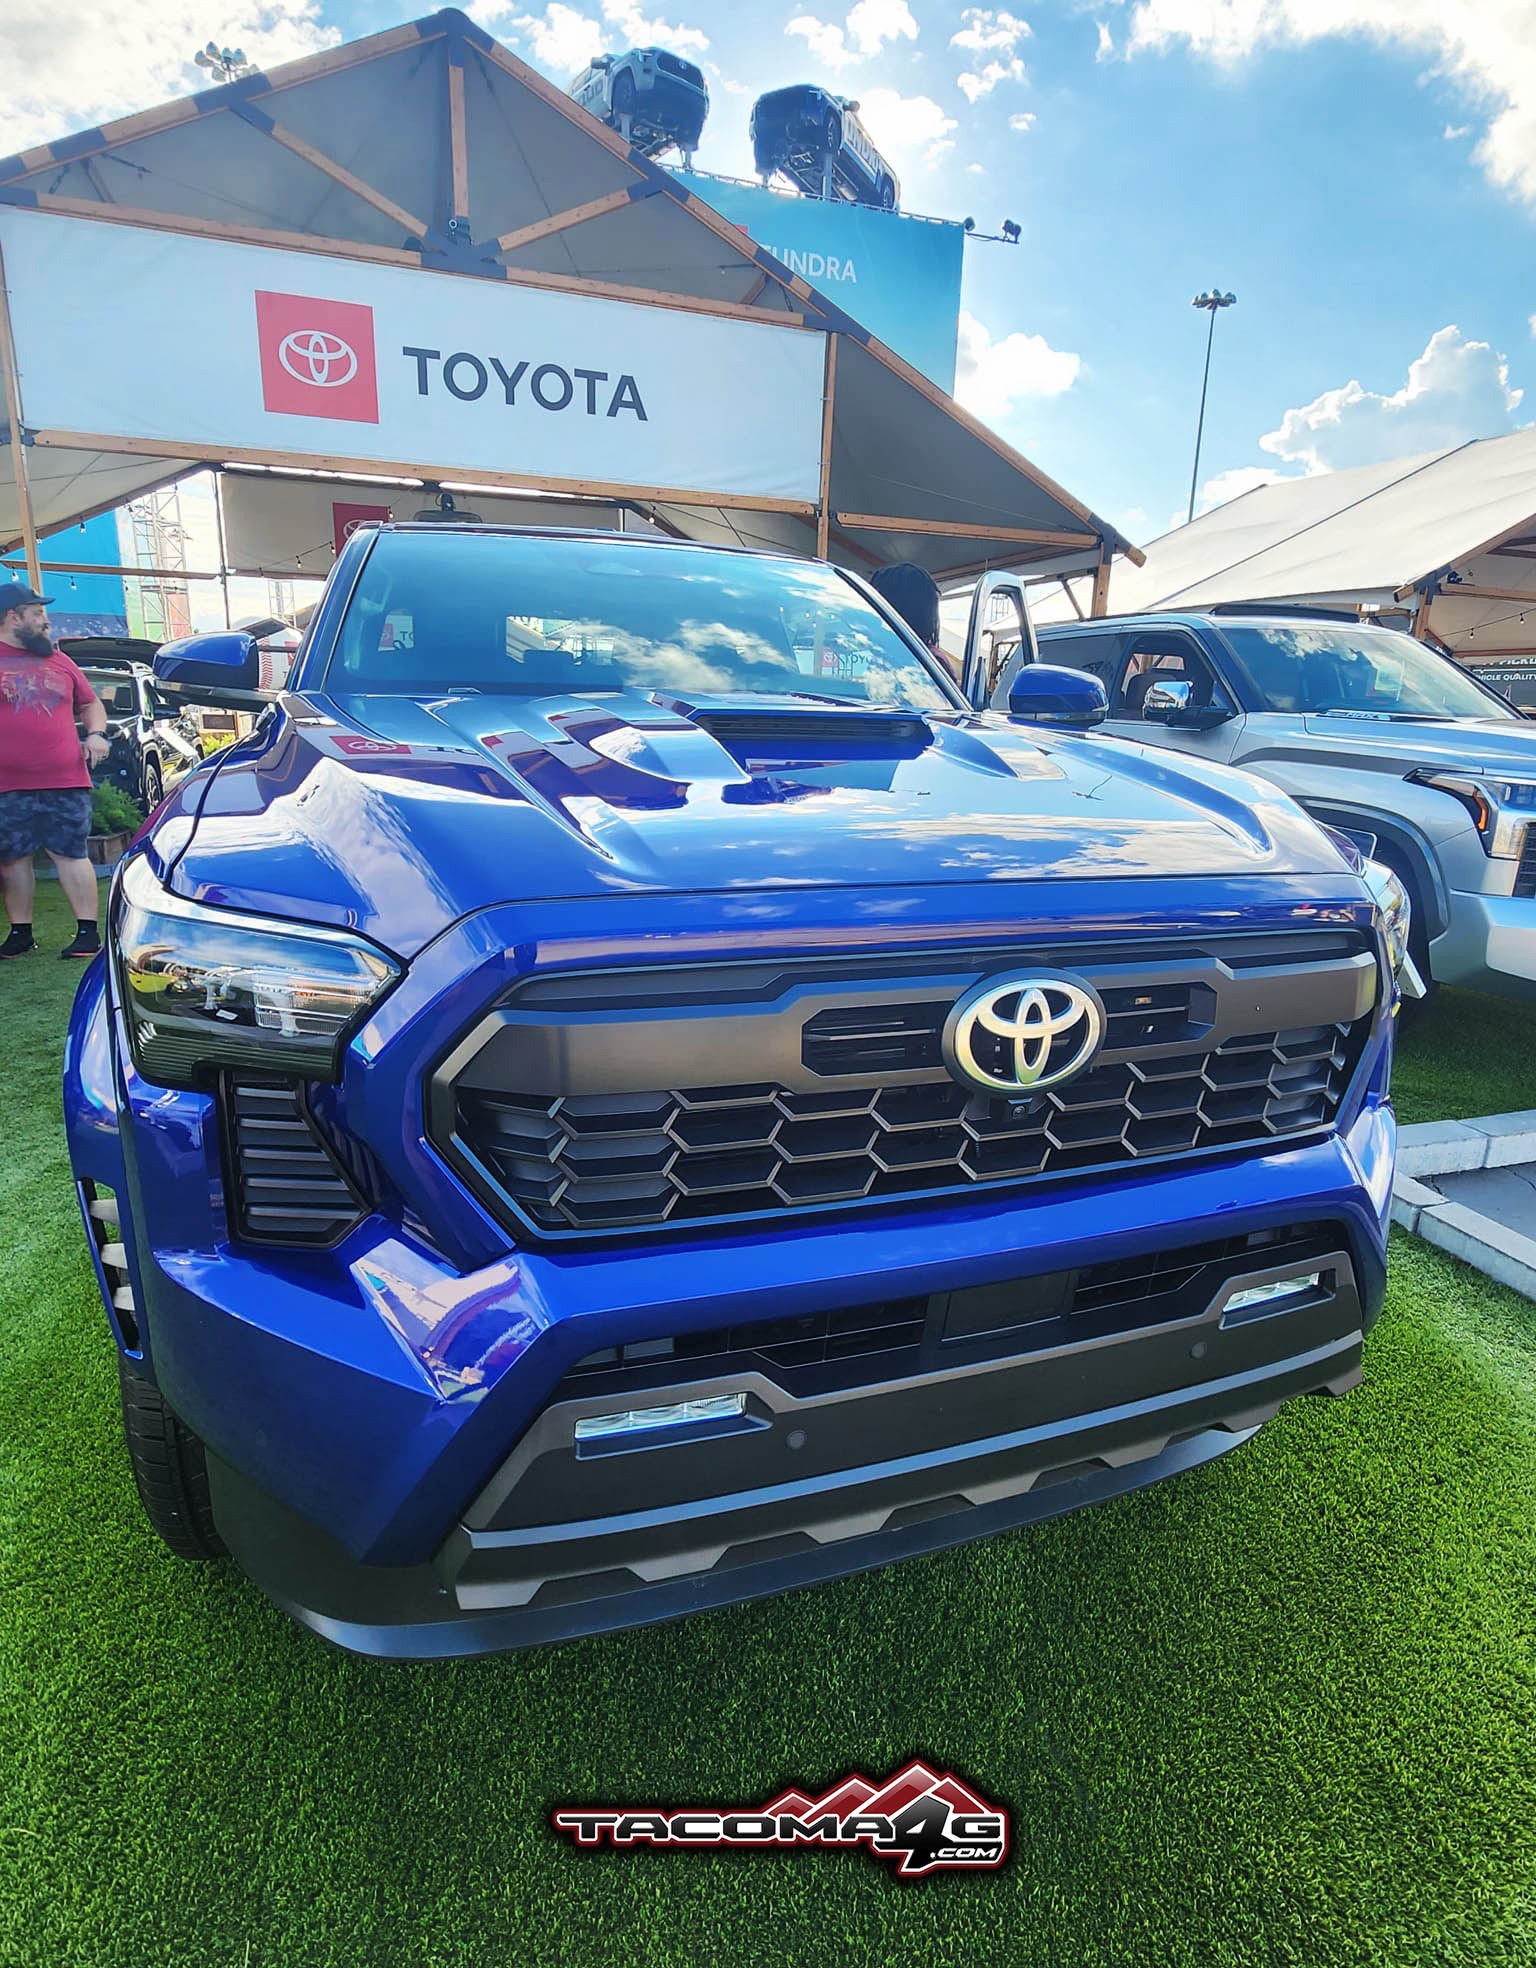 2024 Tacoma Blue Crush Metallic 2024 Tacoma TRD Sport i-Force MAX Hybrid -- exterior & interior first look! 8Blue Crush Metallic 2024 Tacoma Toyota Color Paint Engine Bed 